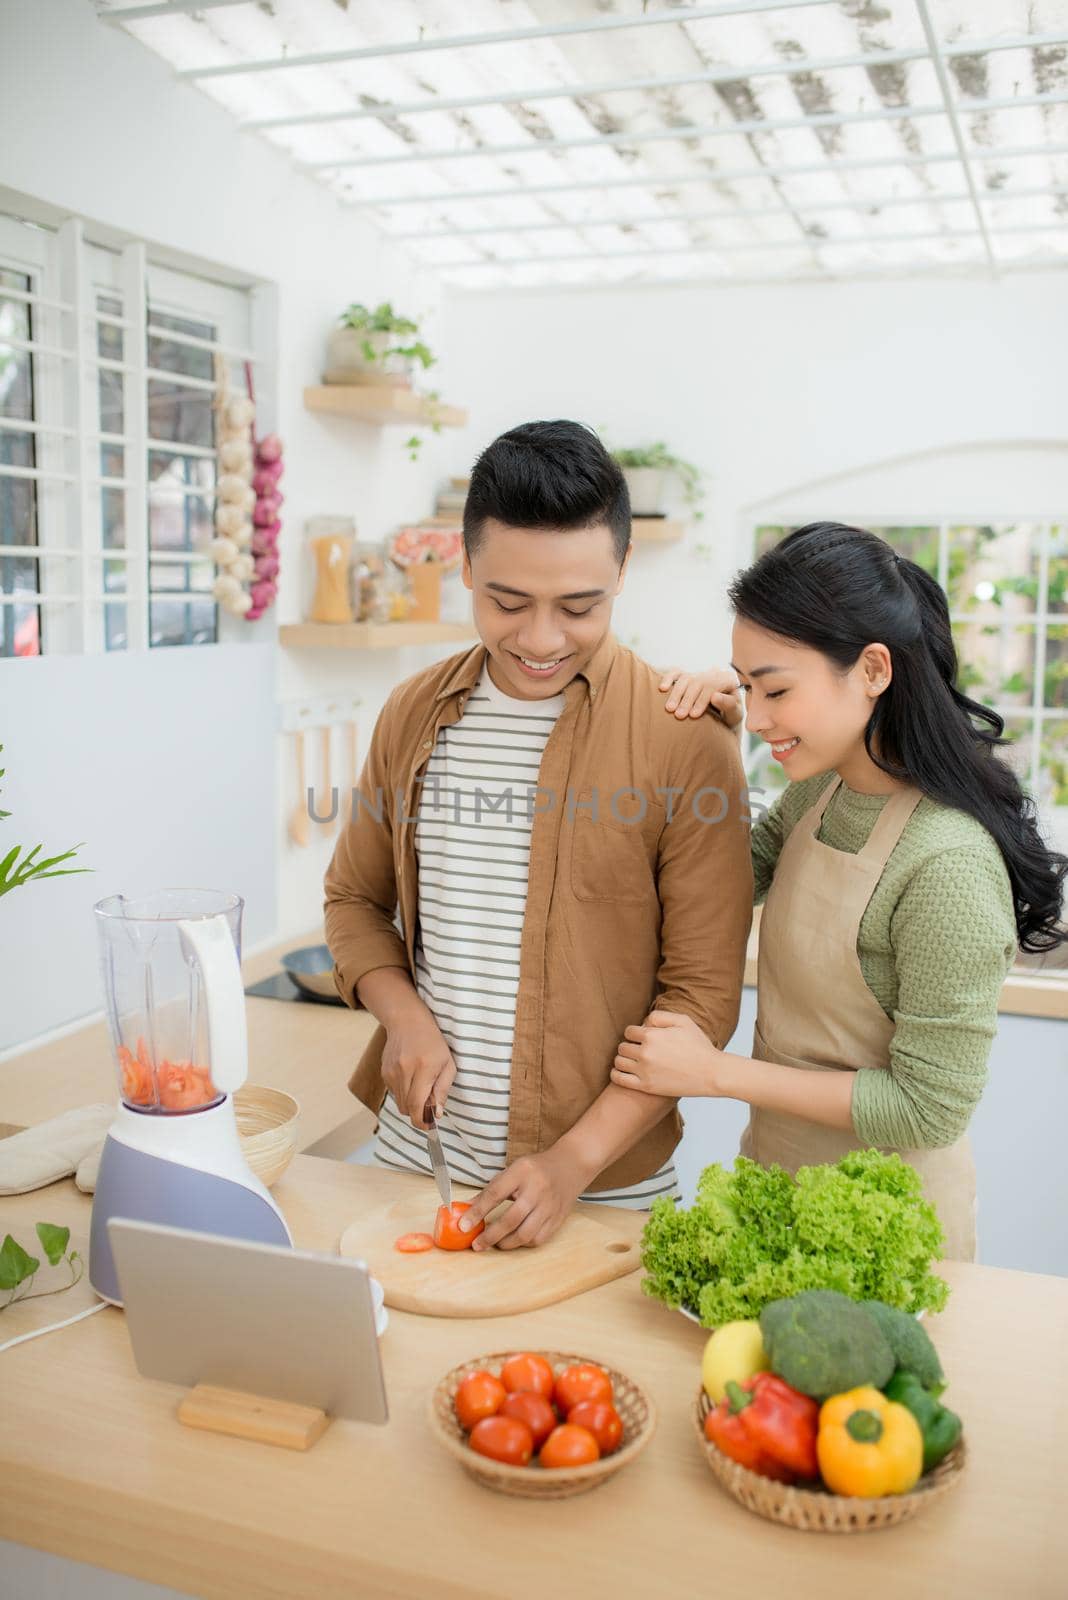 Portrait of a pretty young couple cooking together according to a recipe on a tablet computer